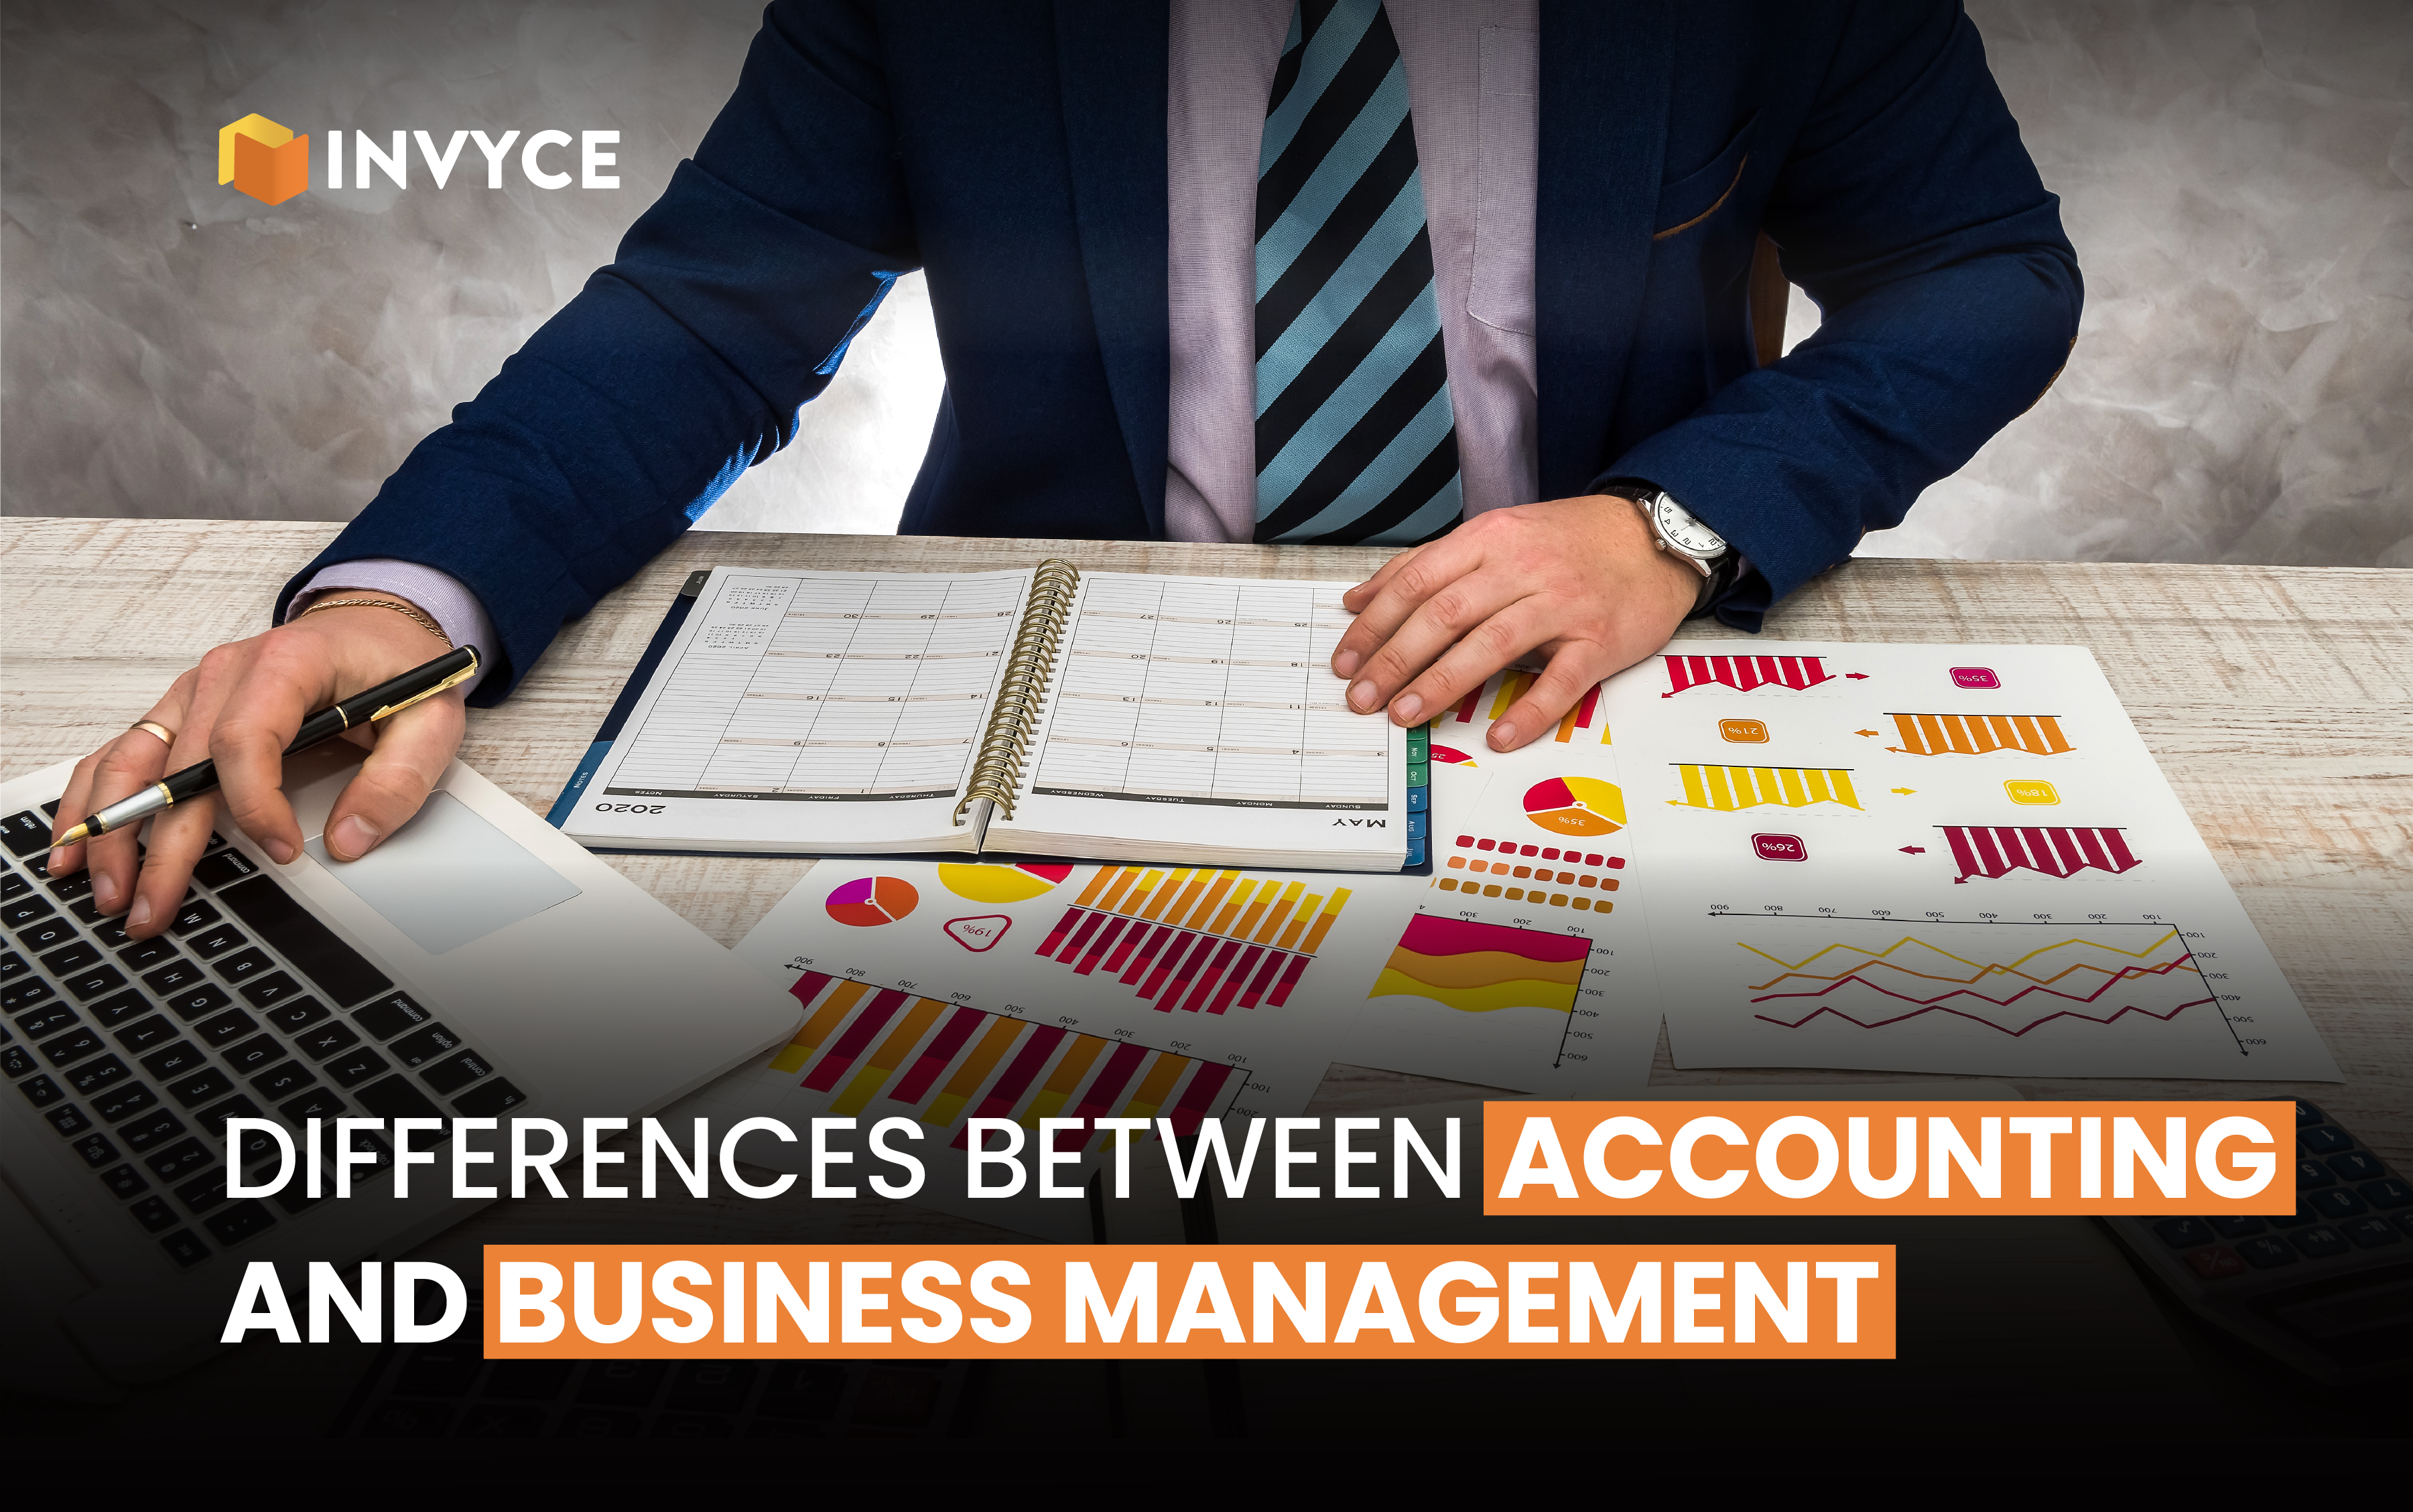 Differences Between Accounting and Business Management